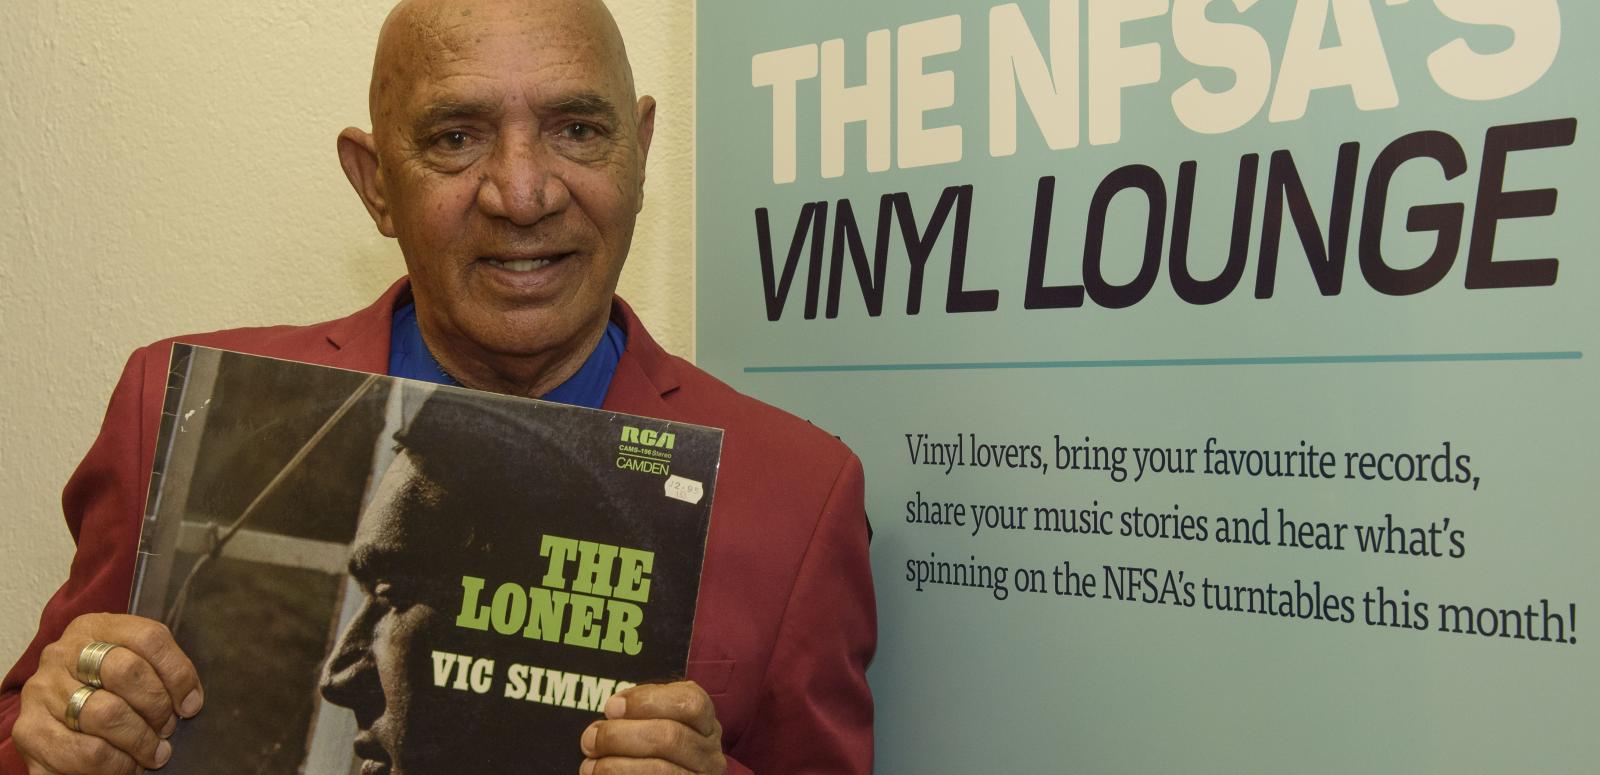 Vic Simms holding a copy of his record The Loner in front of the Vinyl Lounge banner